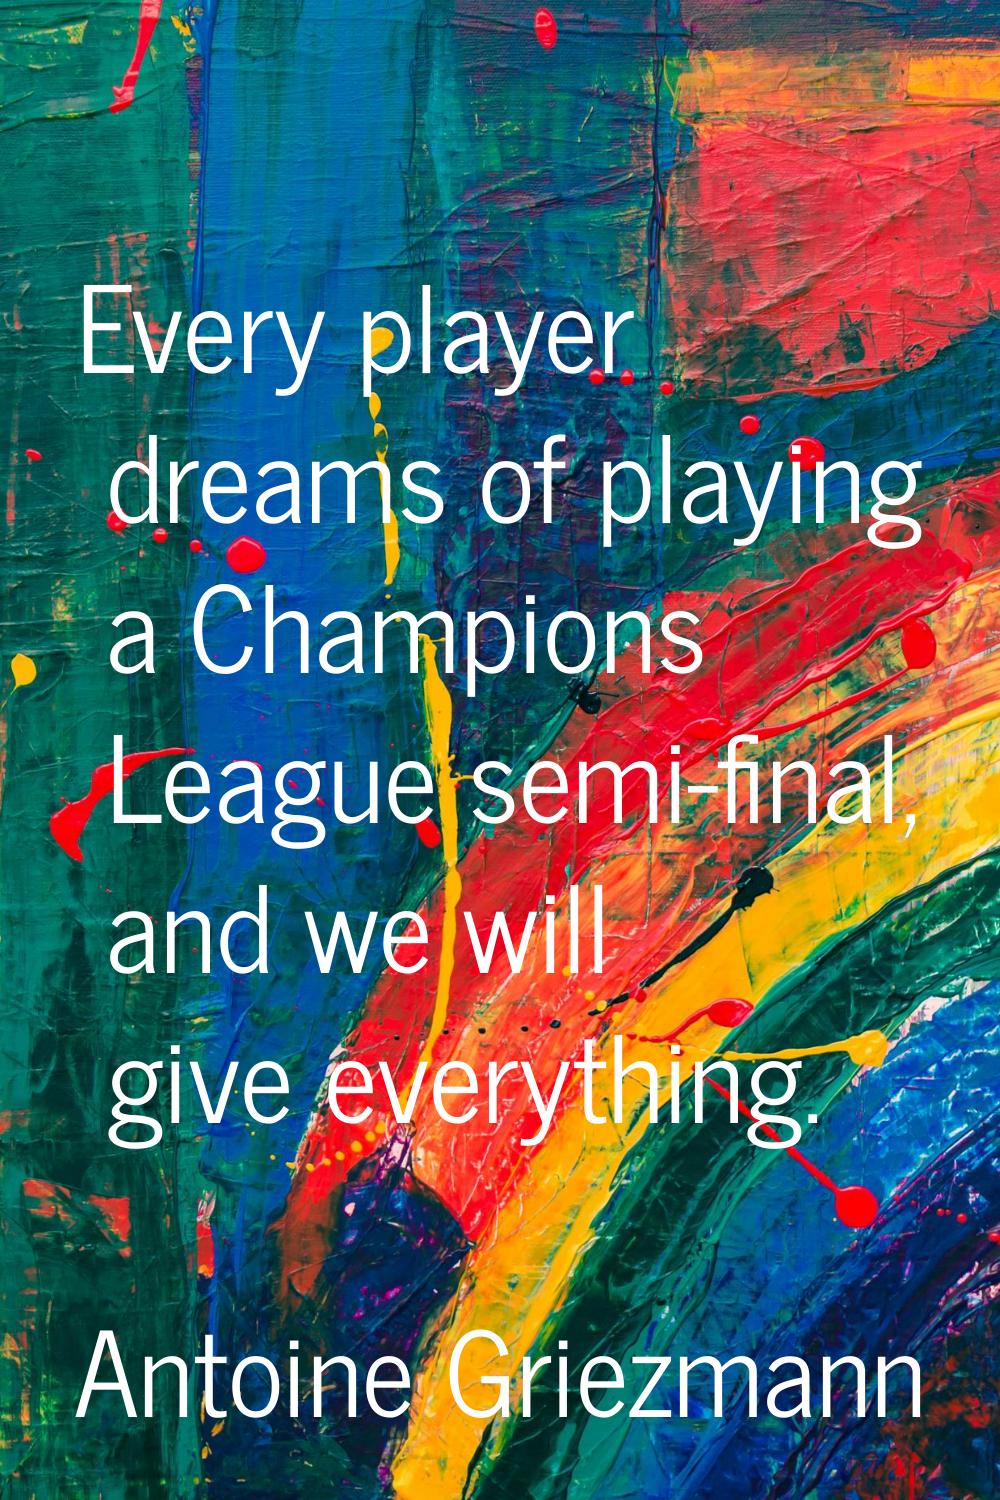 Every player dreams of playing a Champions League semi-final, and we will give everything.